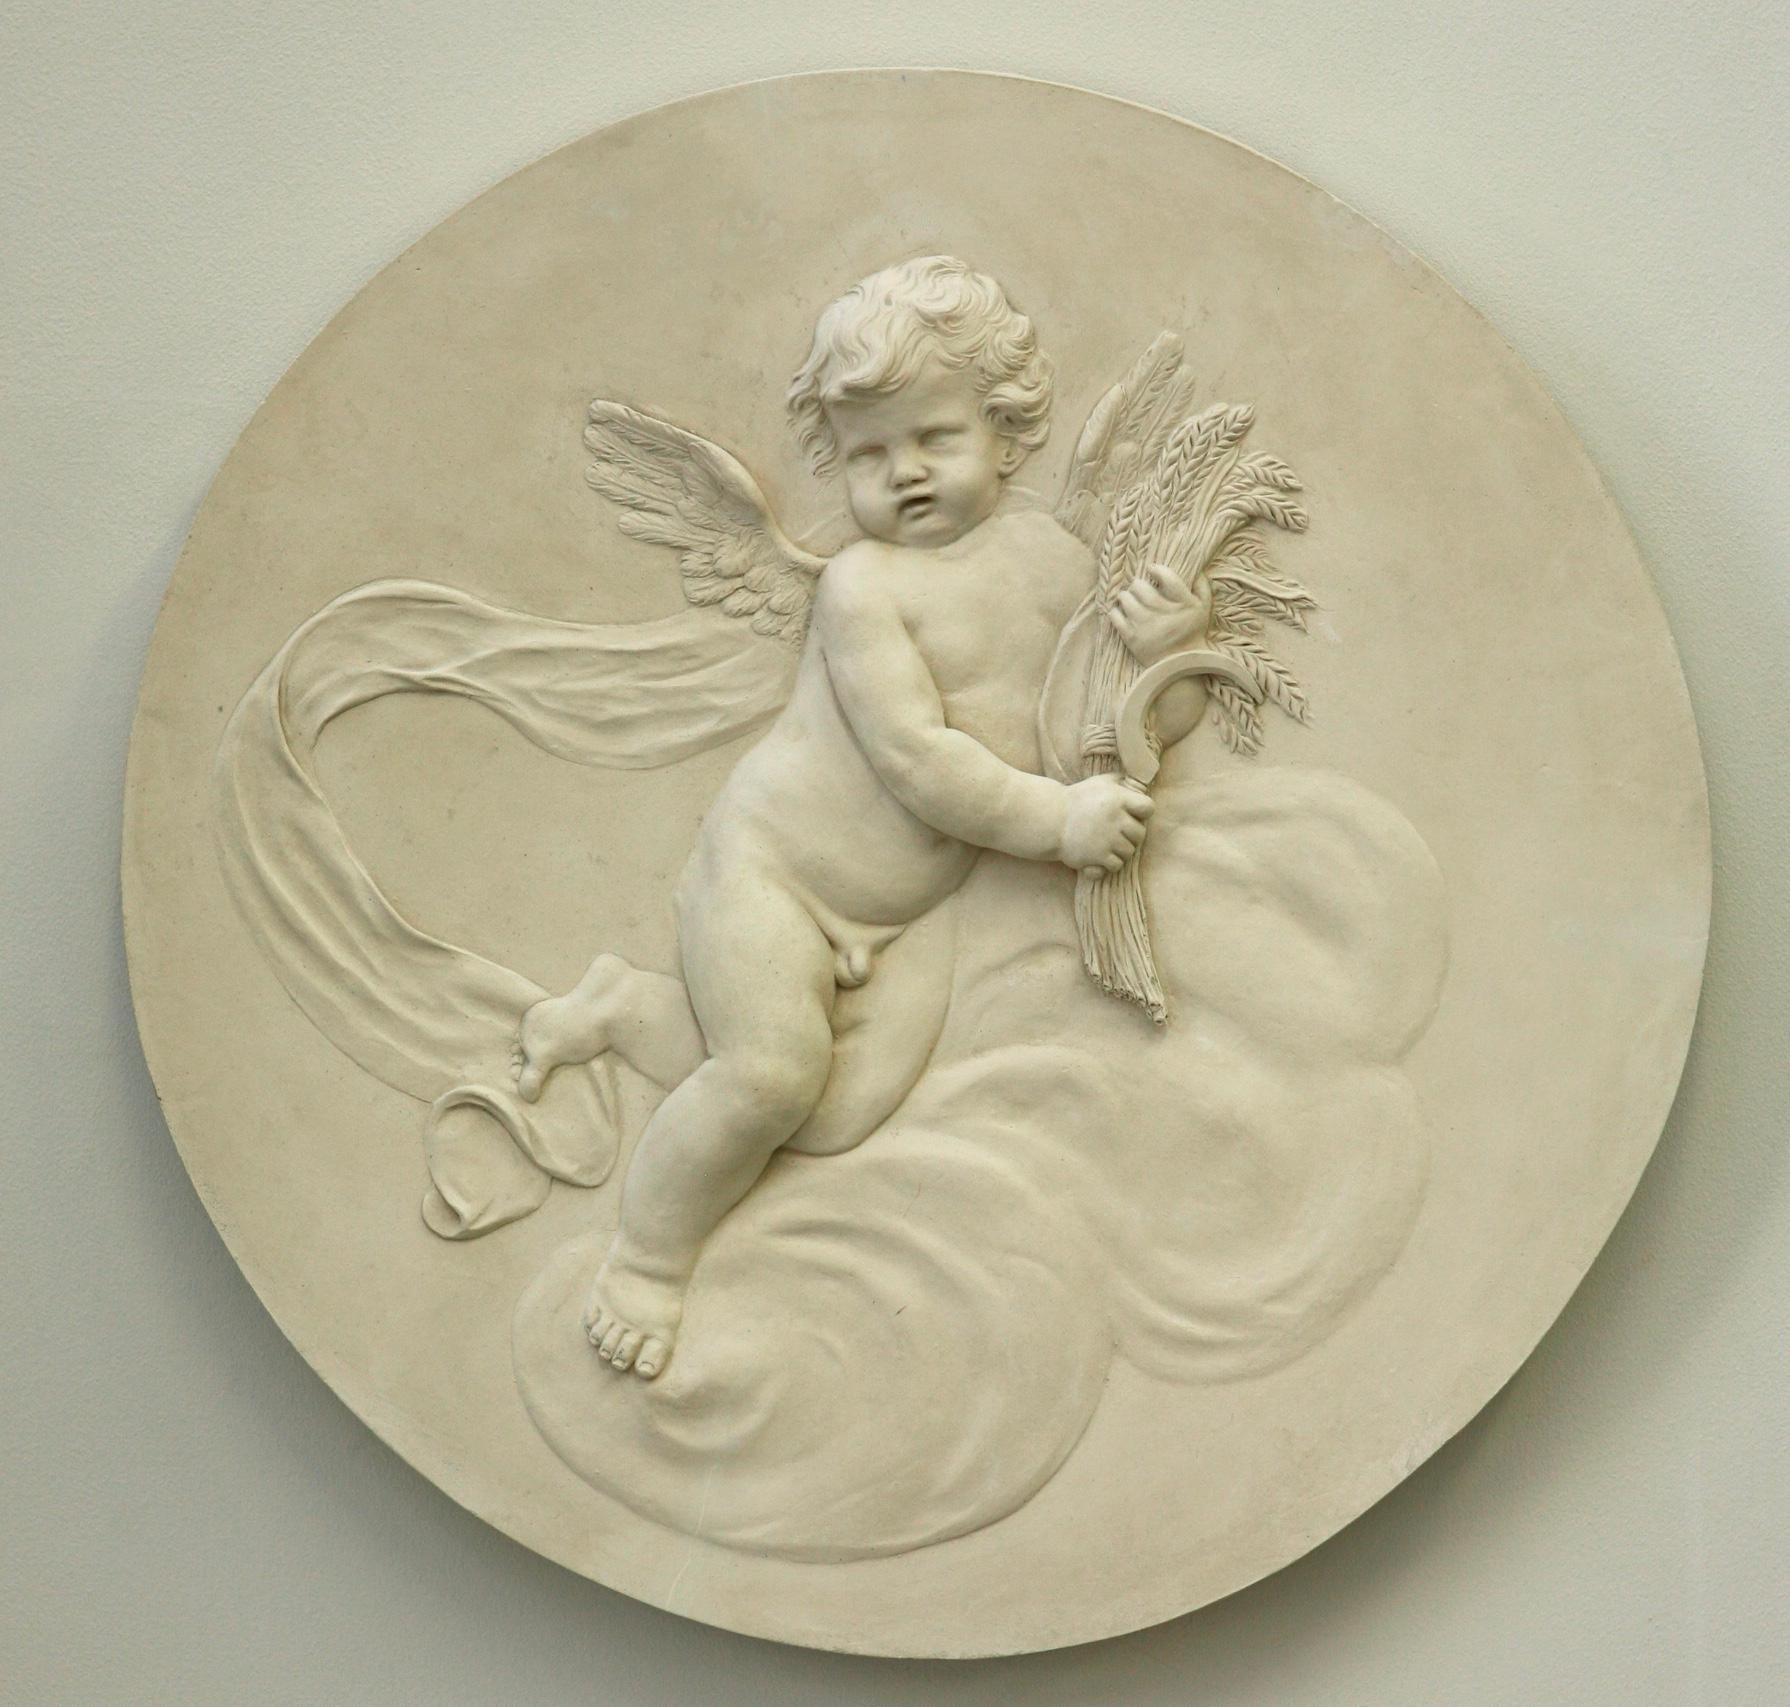 Coade Studio decorative roundel depicting 'Summer' cherub floating on cloud formation. 'Summer' is holding wheat. Modelled in delicate low relief. The four seasons roundels are influenced by the 18th century Coade designs.

Also available as a set